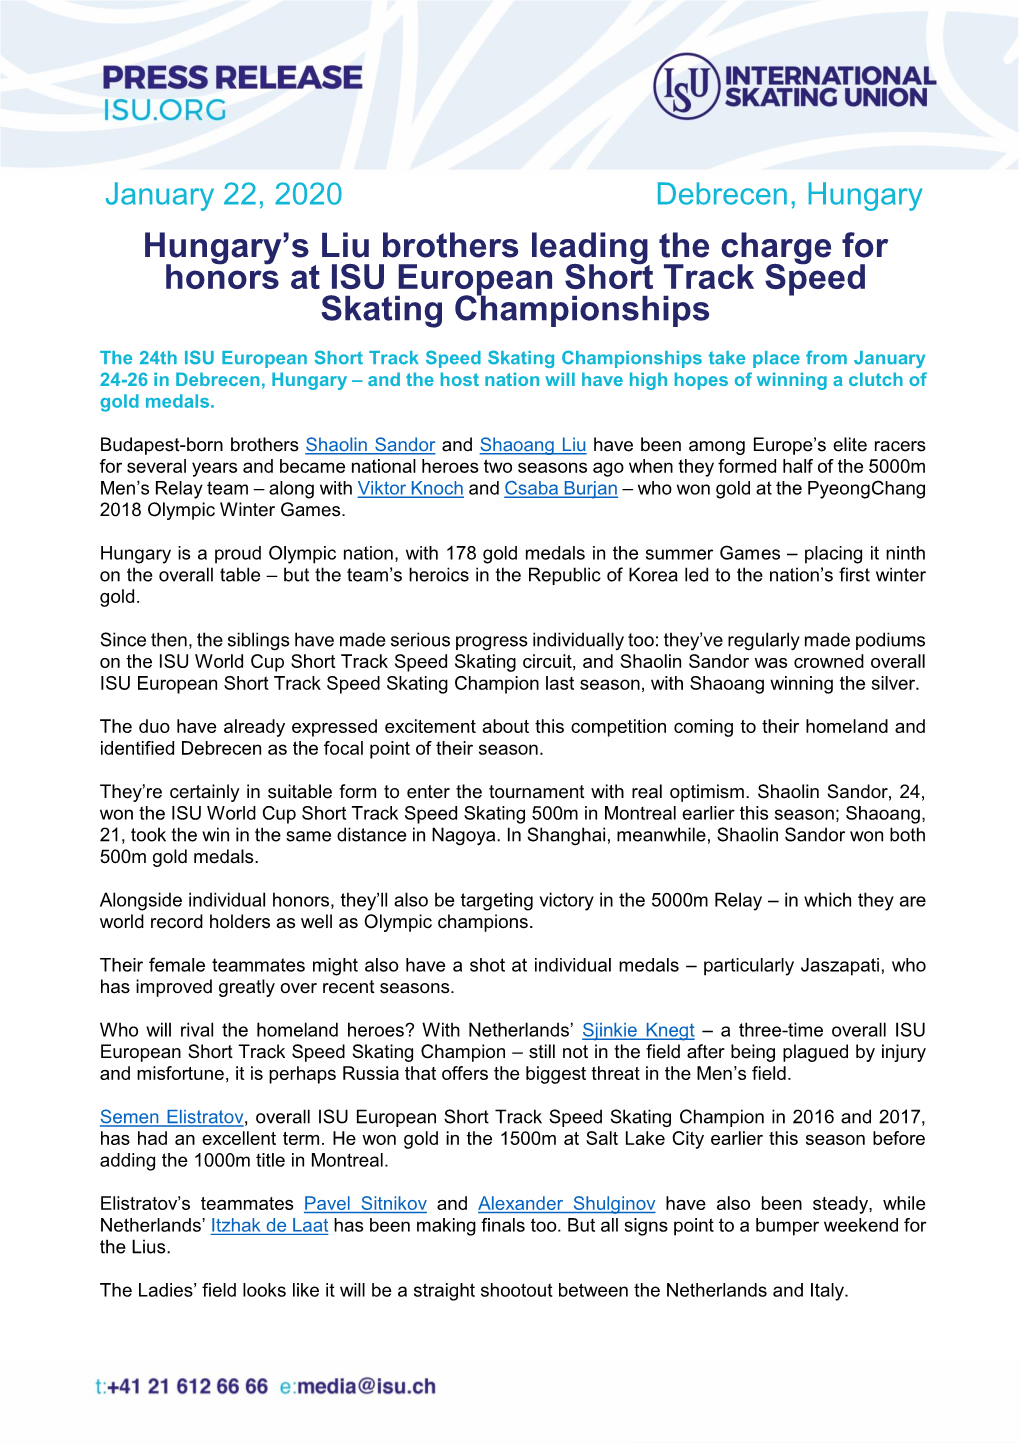 Hungary's Liu Brothers Leading the Charge for Honors at ISU European